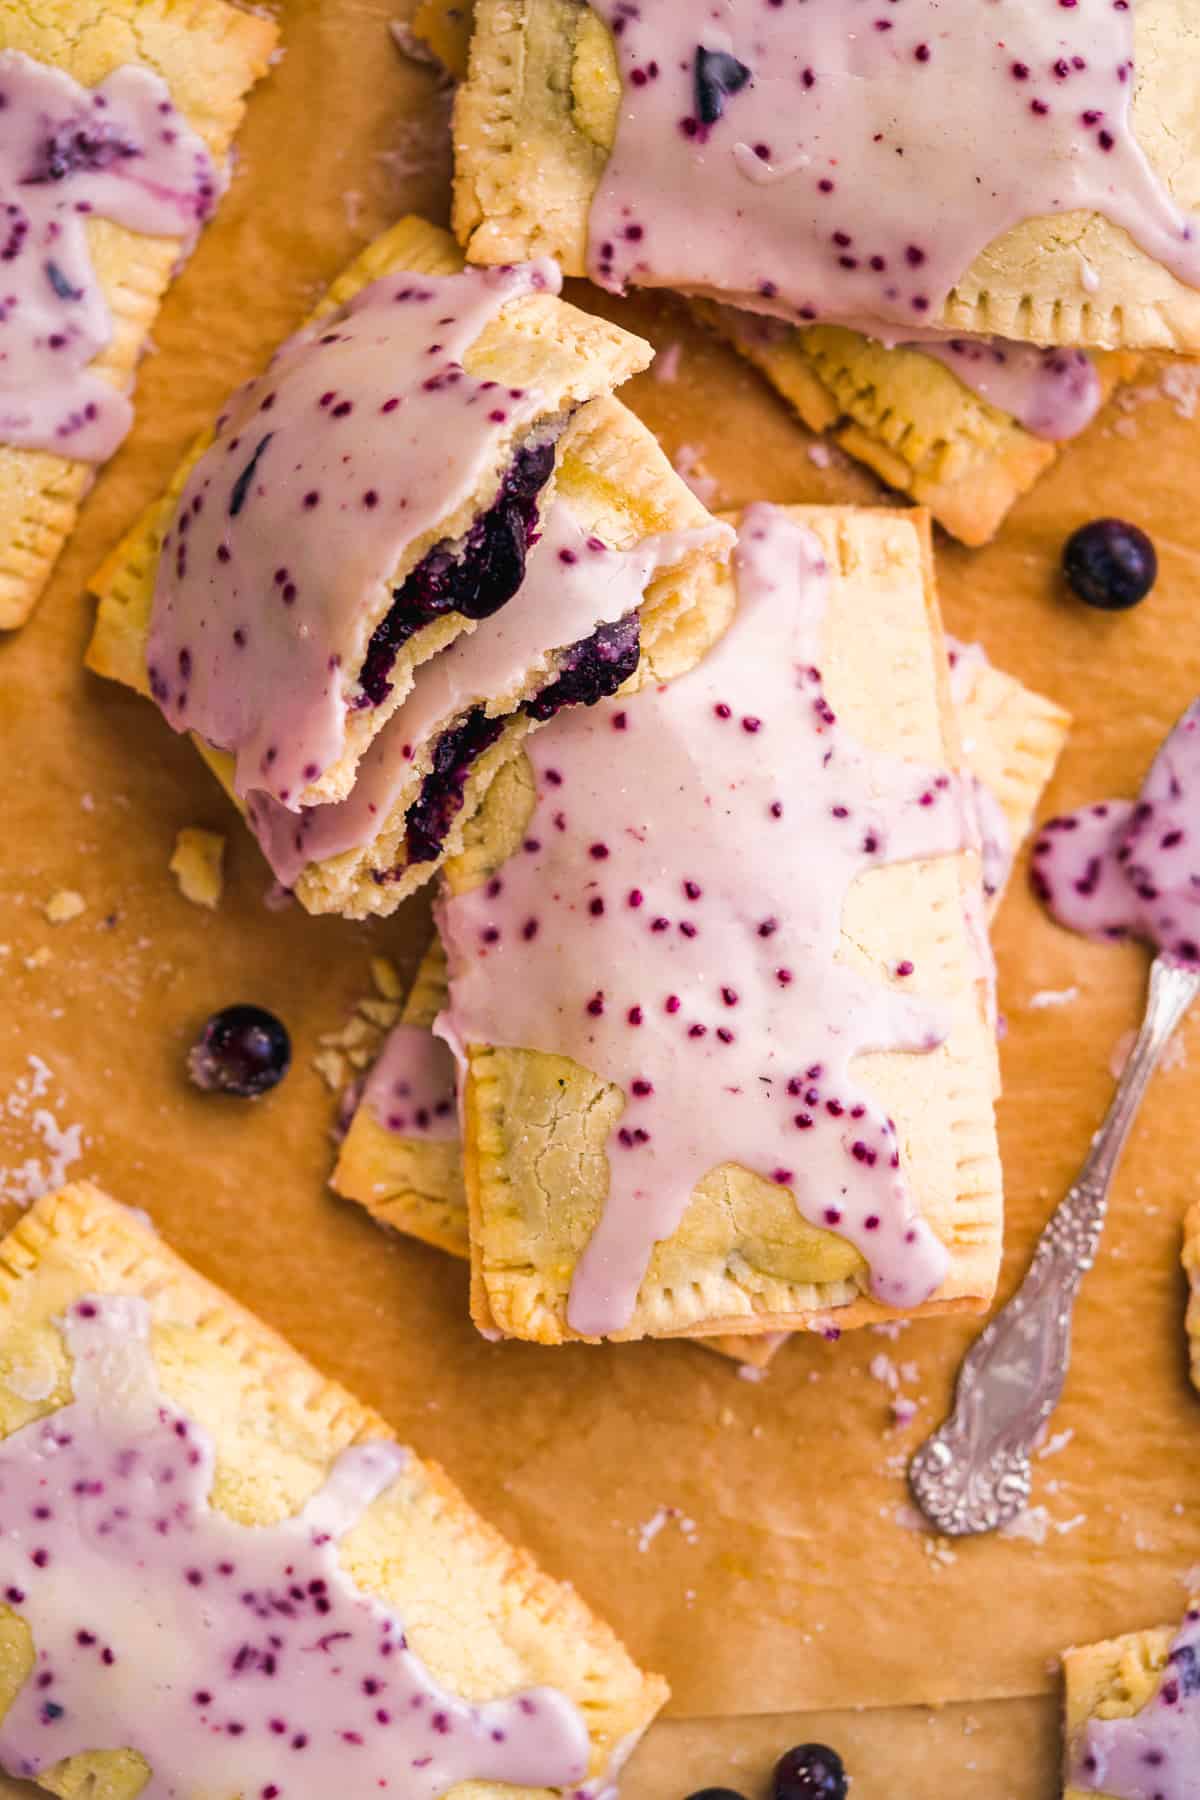 Blueberry pop tarts with filling on parchment paper.